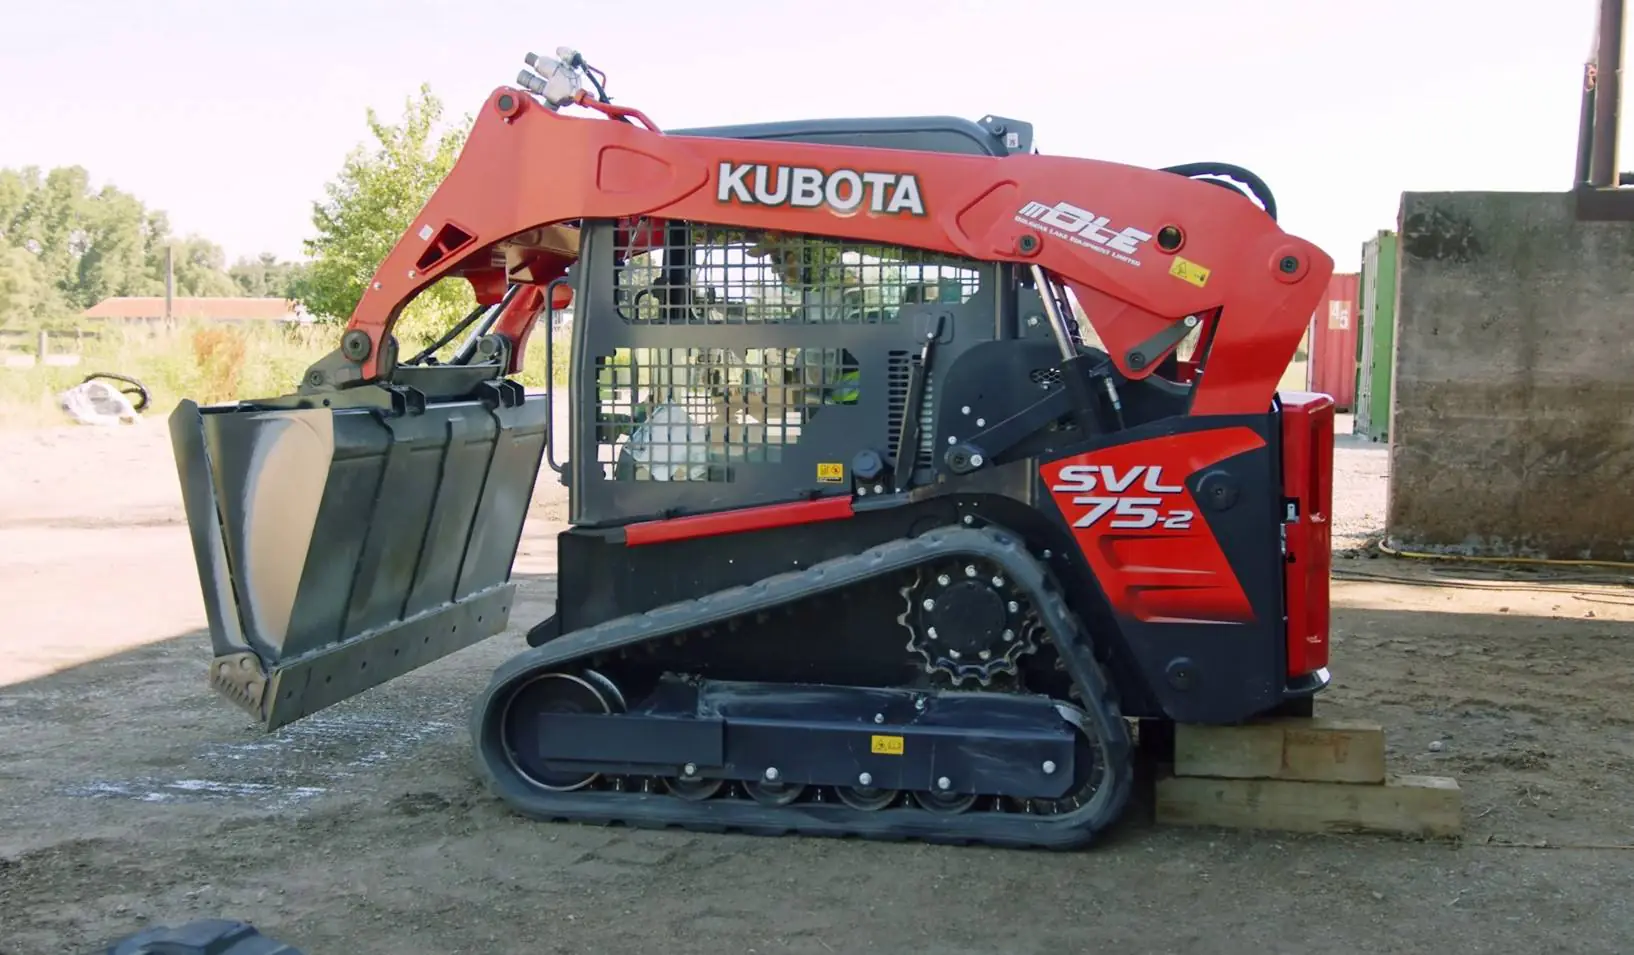 Kubota SVL75-2 CTL lifts the boom up into the air